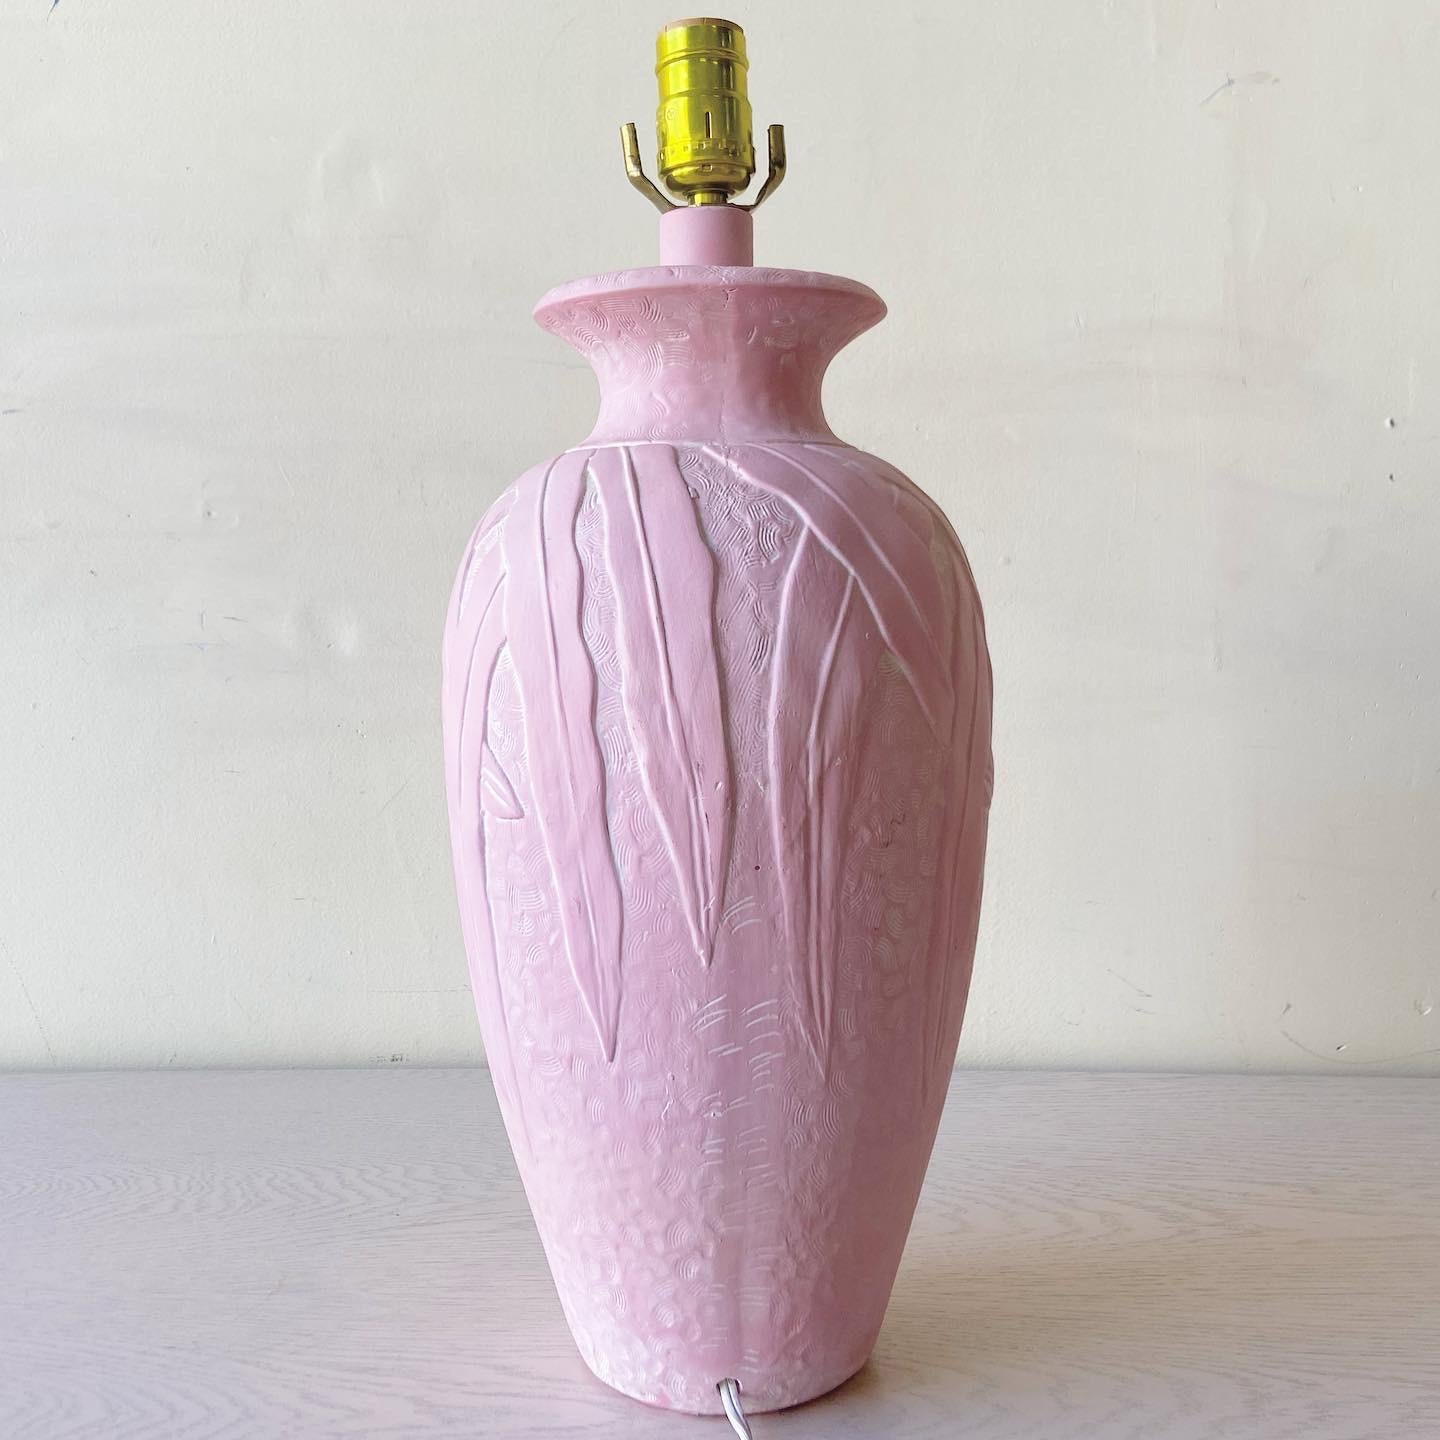 Incredible pink ceramic table lamp. Features little grooves tessellating the lamp beneath banana leaves.

Additional information:
Material: Ceramic, Plaster
Color: Pink
Style: Postmodern
Time Period: 1980s
Place of origin: USA
Dimension: 8ʺ W × 8ʺ D